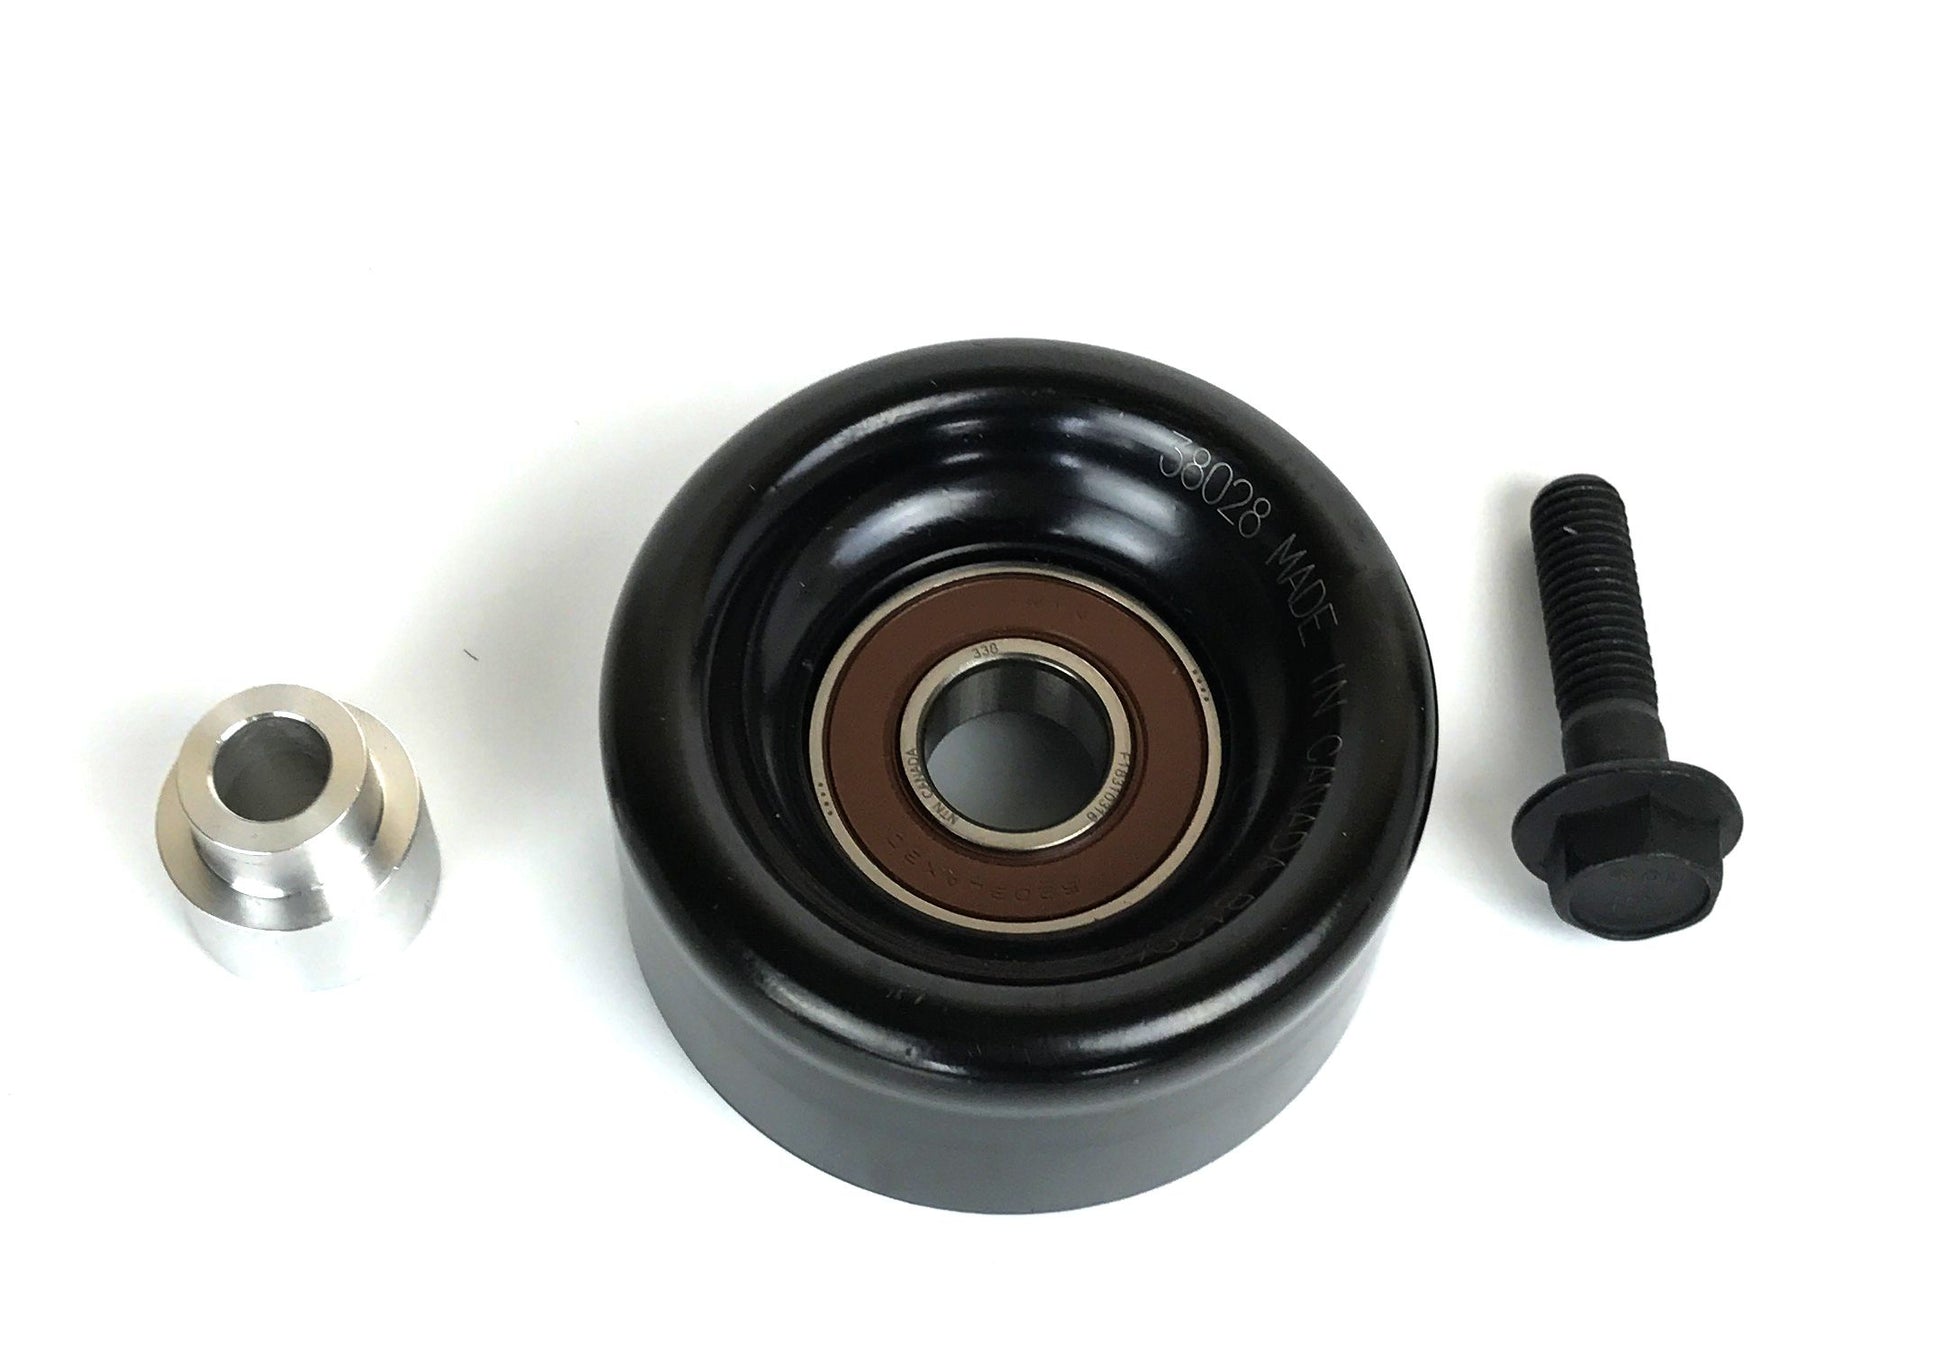 FPE-34277 Fleece Cummins Dual Pump Idler Pulley, Spacer, and Bolt (For use with FPE-34022-PC & FPE-34610-PC) Hell On Wheels Canada